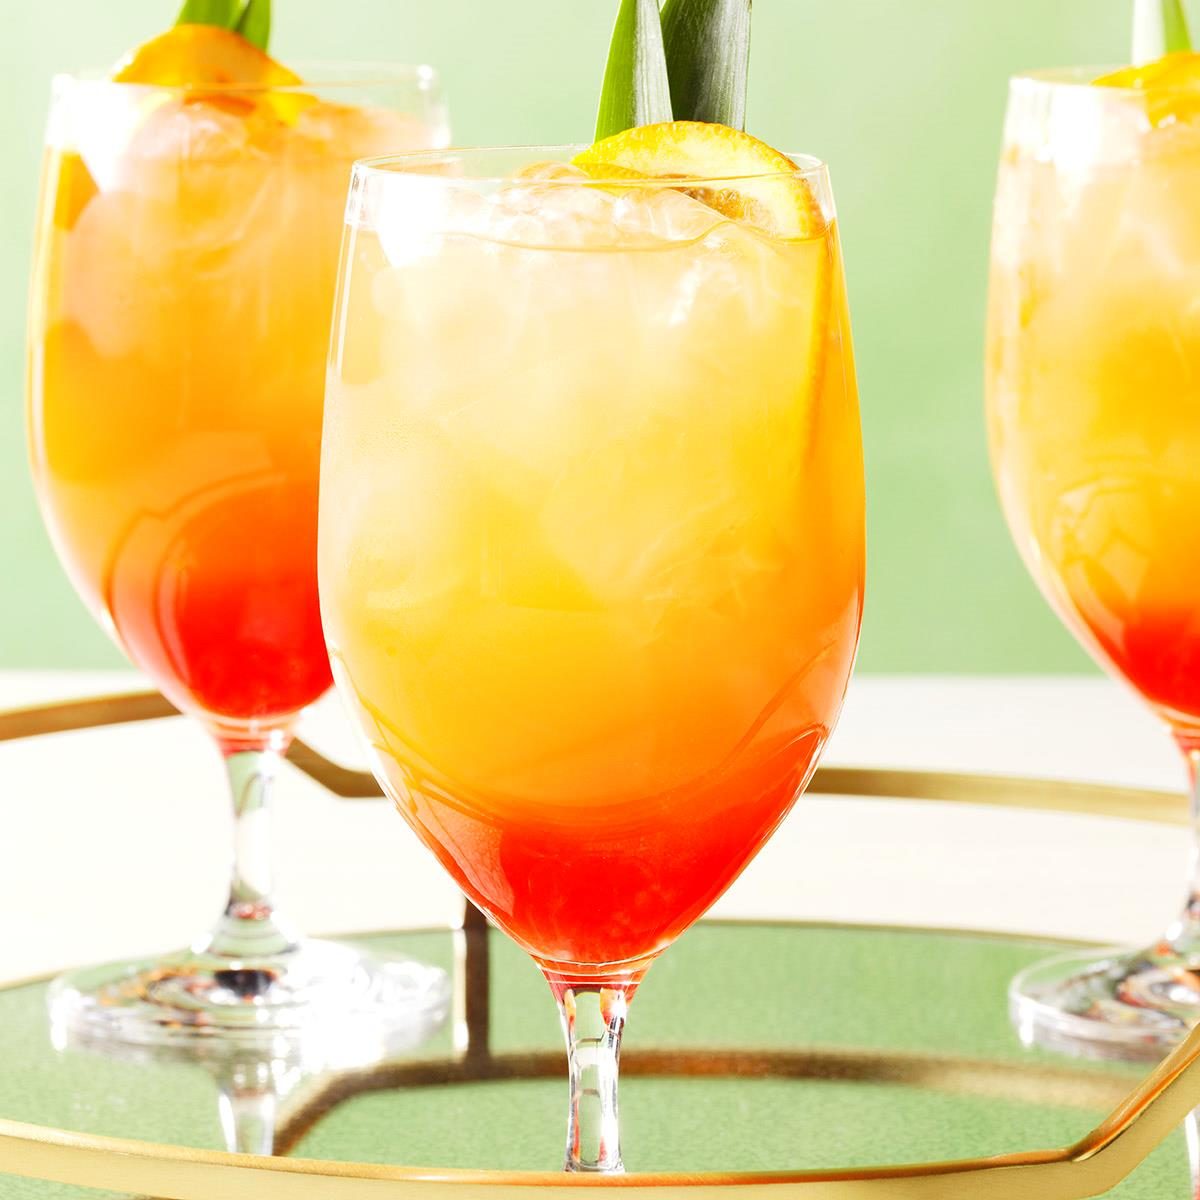 Pineapple Rum Punch Recipe: How to Make It